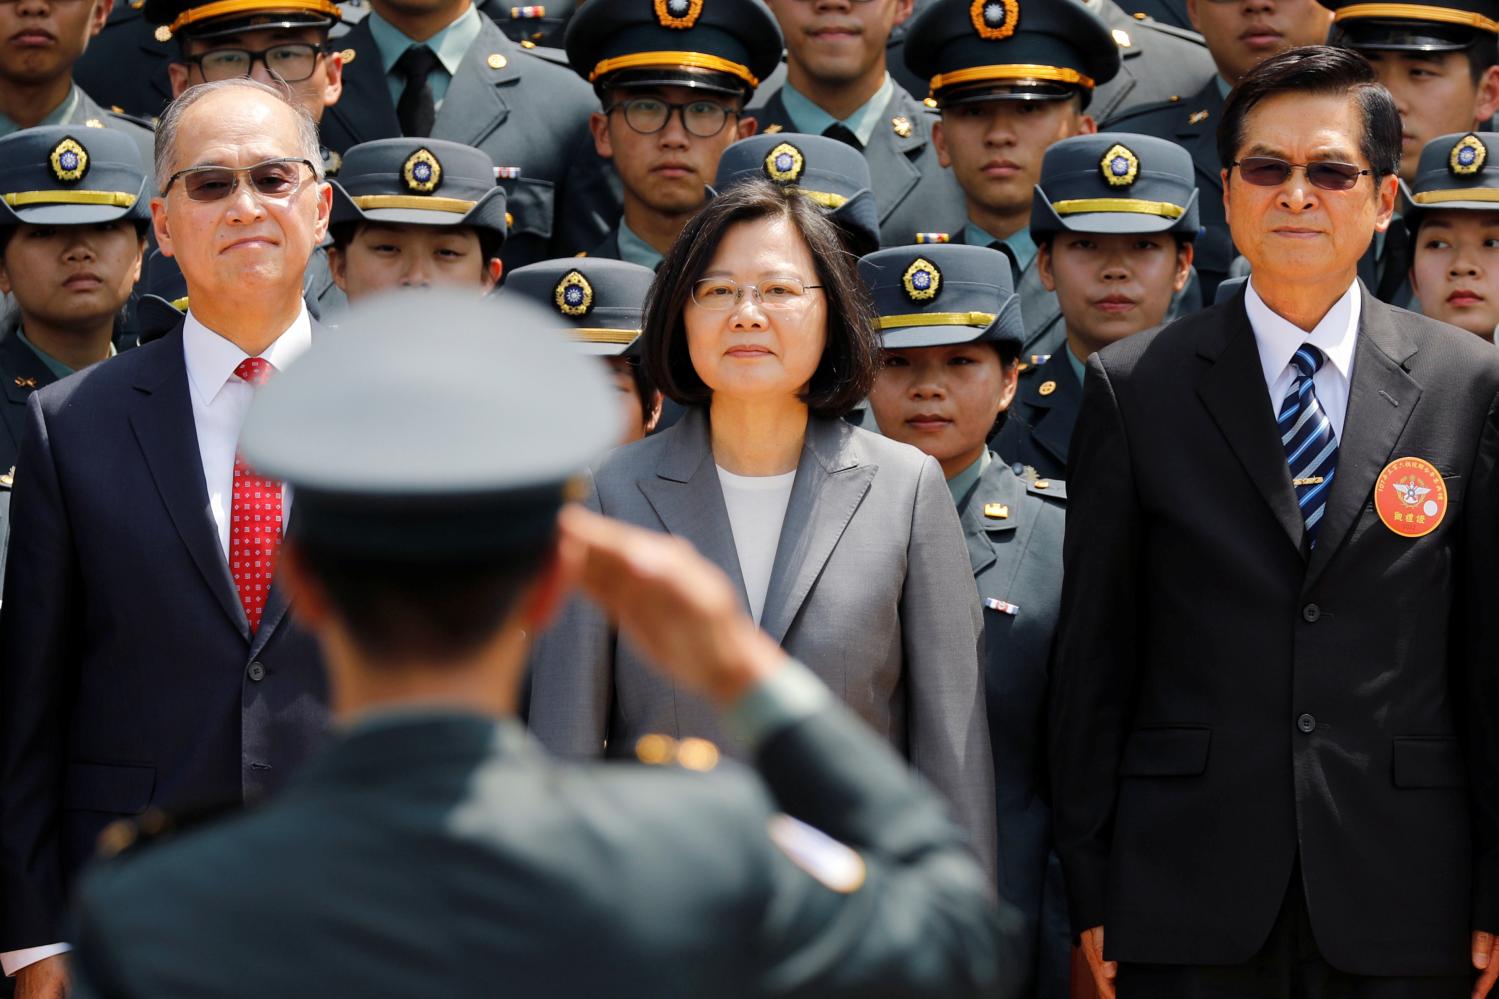 A soldier salutes (L-R) Director of the Institute for National Security Studies Feng Shih-kuan, Taiwanese President Tsai Ing-wen, and Minister of National Defense Yen Teh-fa after the joint military academies graduation ceremony, in Taipei, Taiwan June 29, 2018. REUTERS/Tyrone Siu